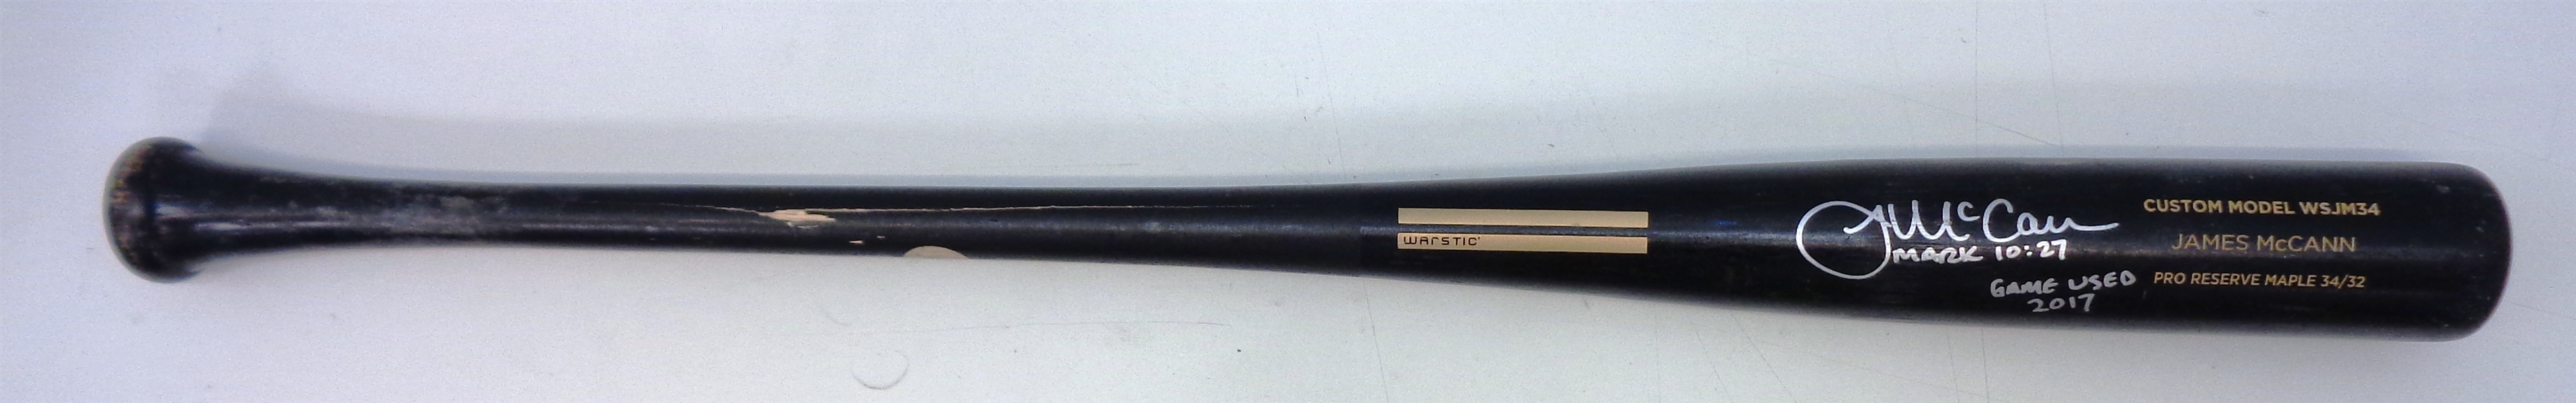 James McCann Game Used & Signed Bat from 2017